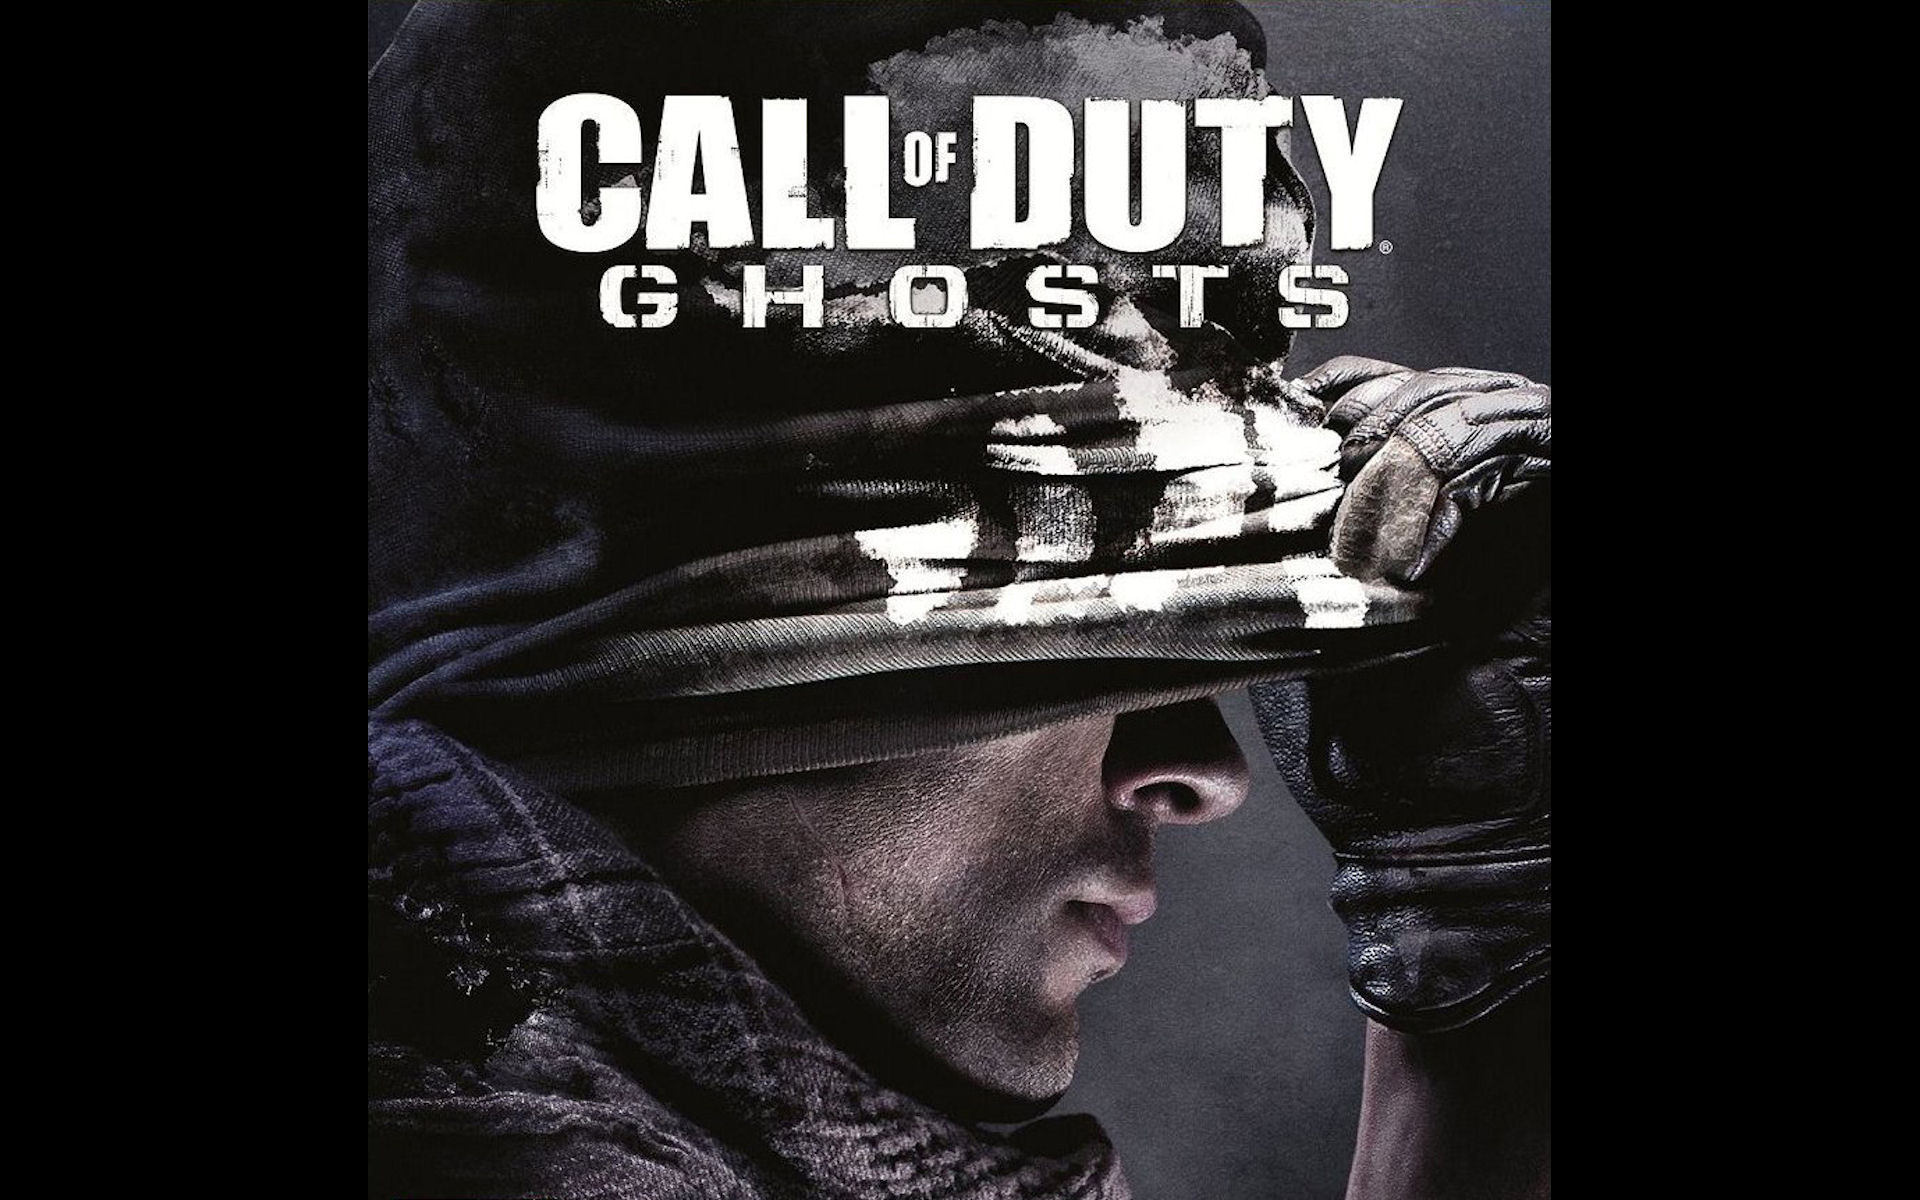 Call of duty ghosts wallpaper hd